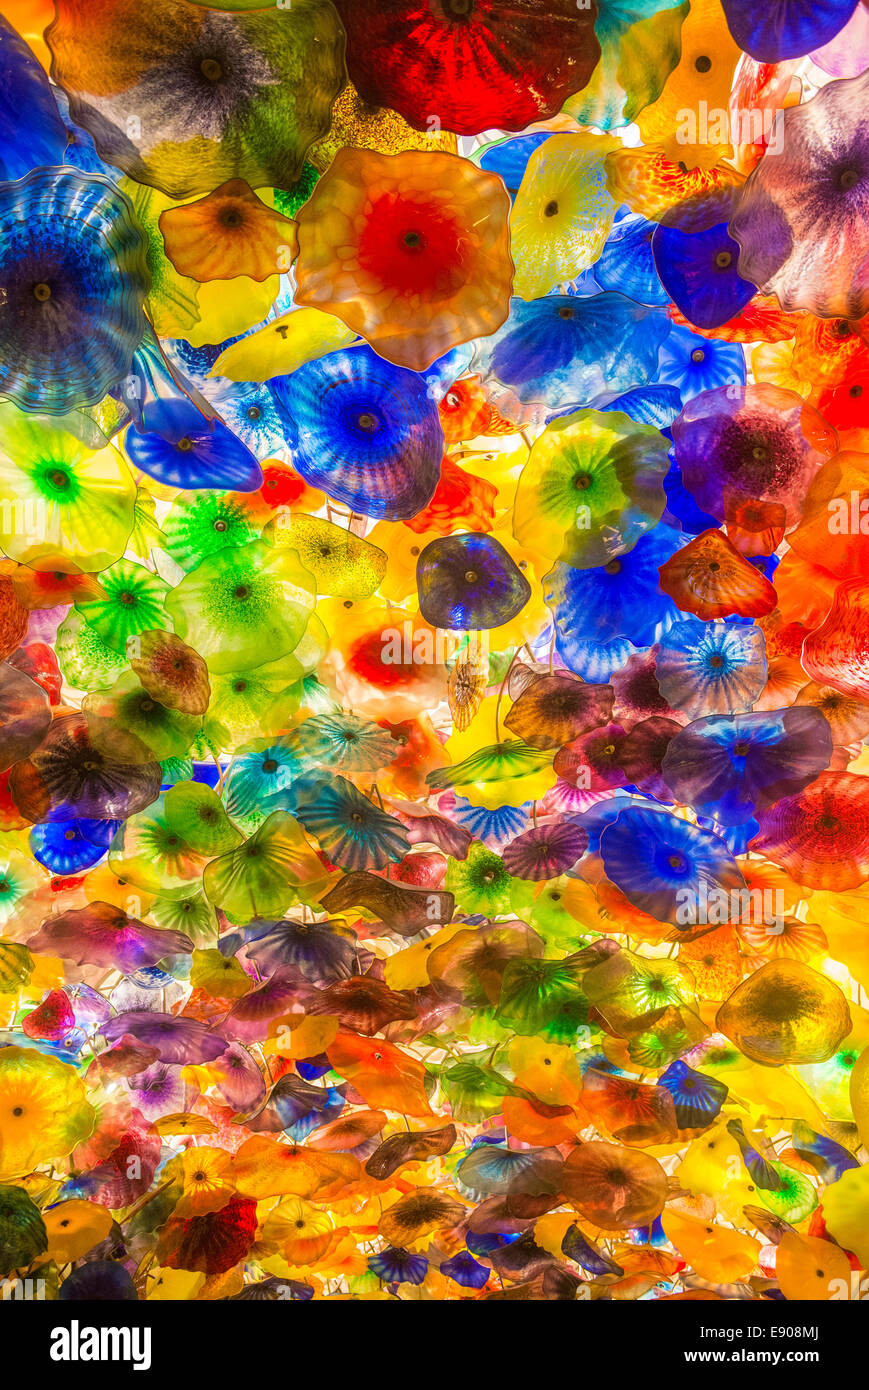 The Hand Blown Glass Flower Ceiling At The Bellagio Hotel Stock